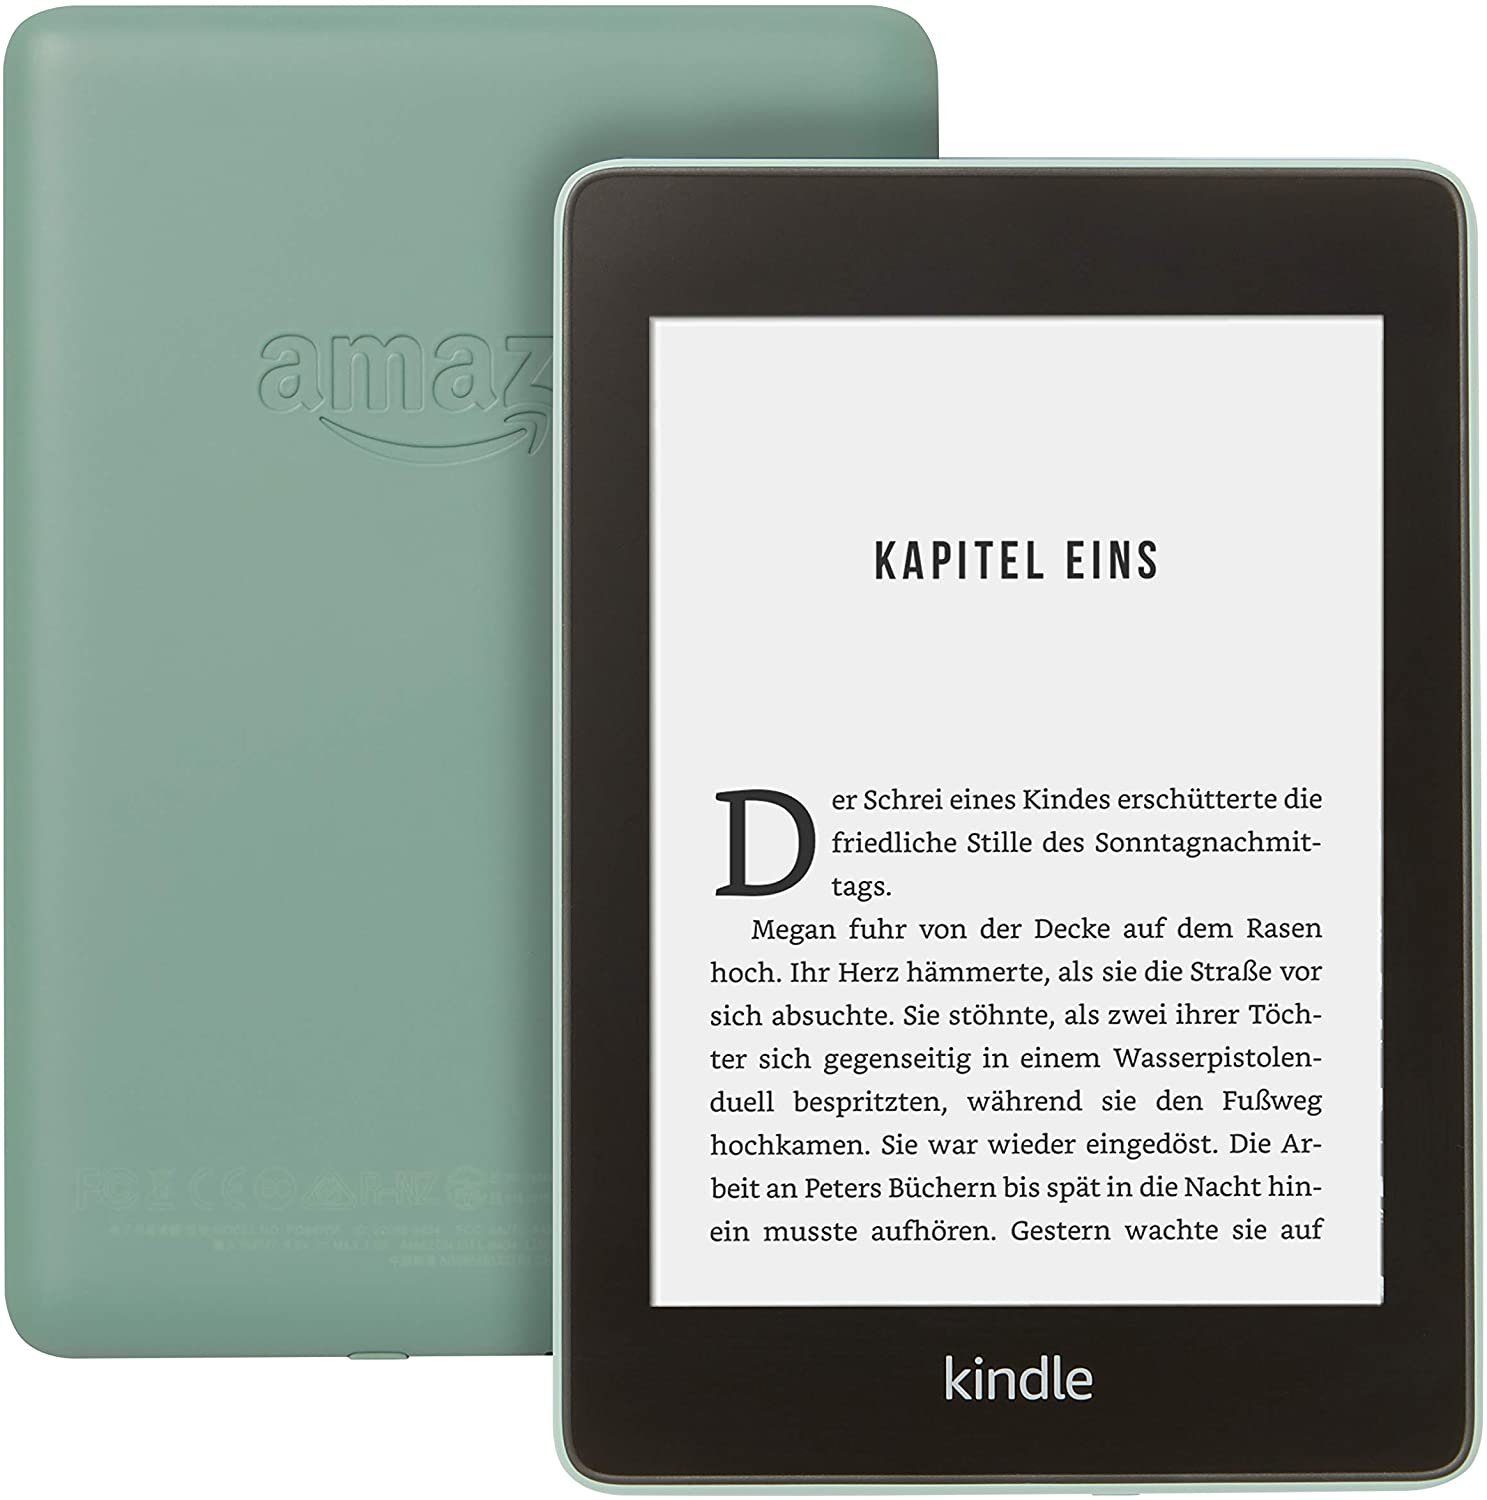 Amazon Kindle Paperwhite Touch 32GB WiFi eBook Reader Tablet grün Tablet